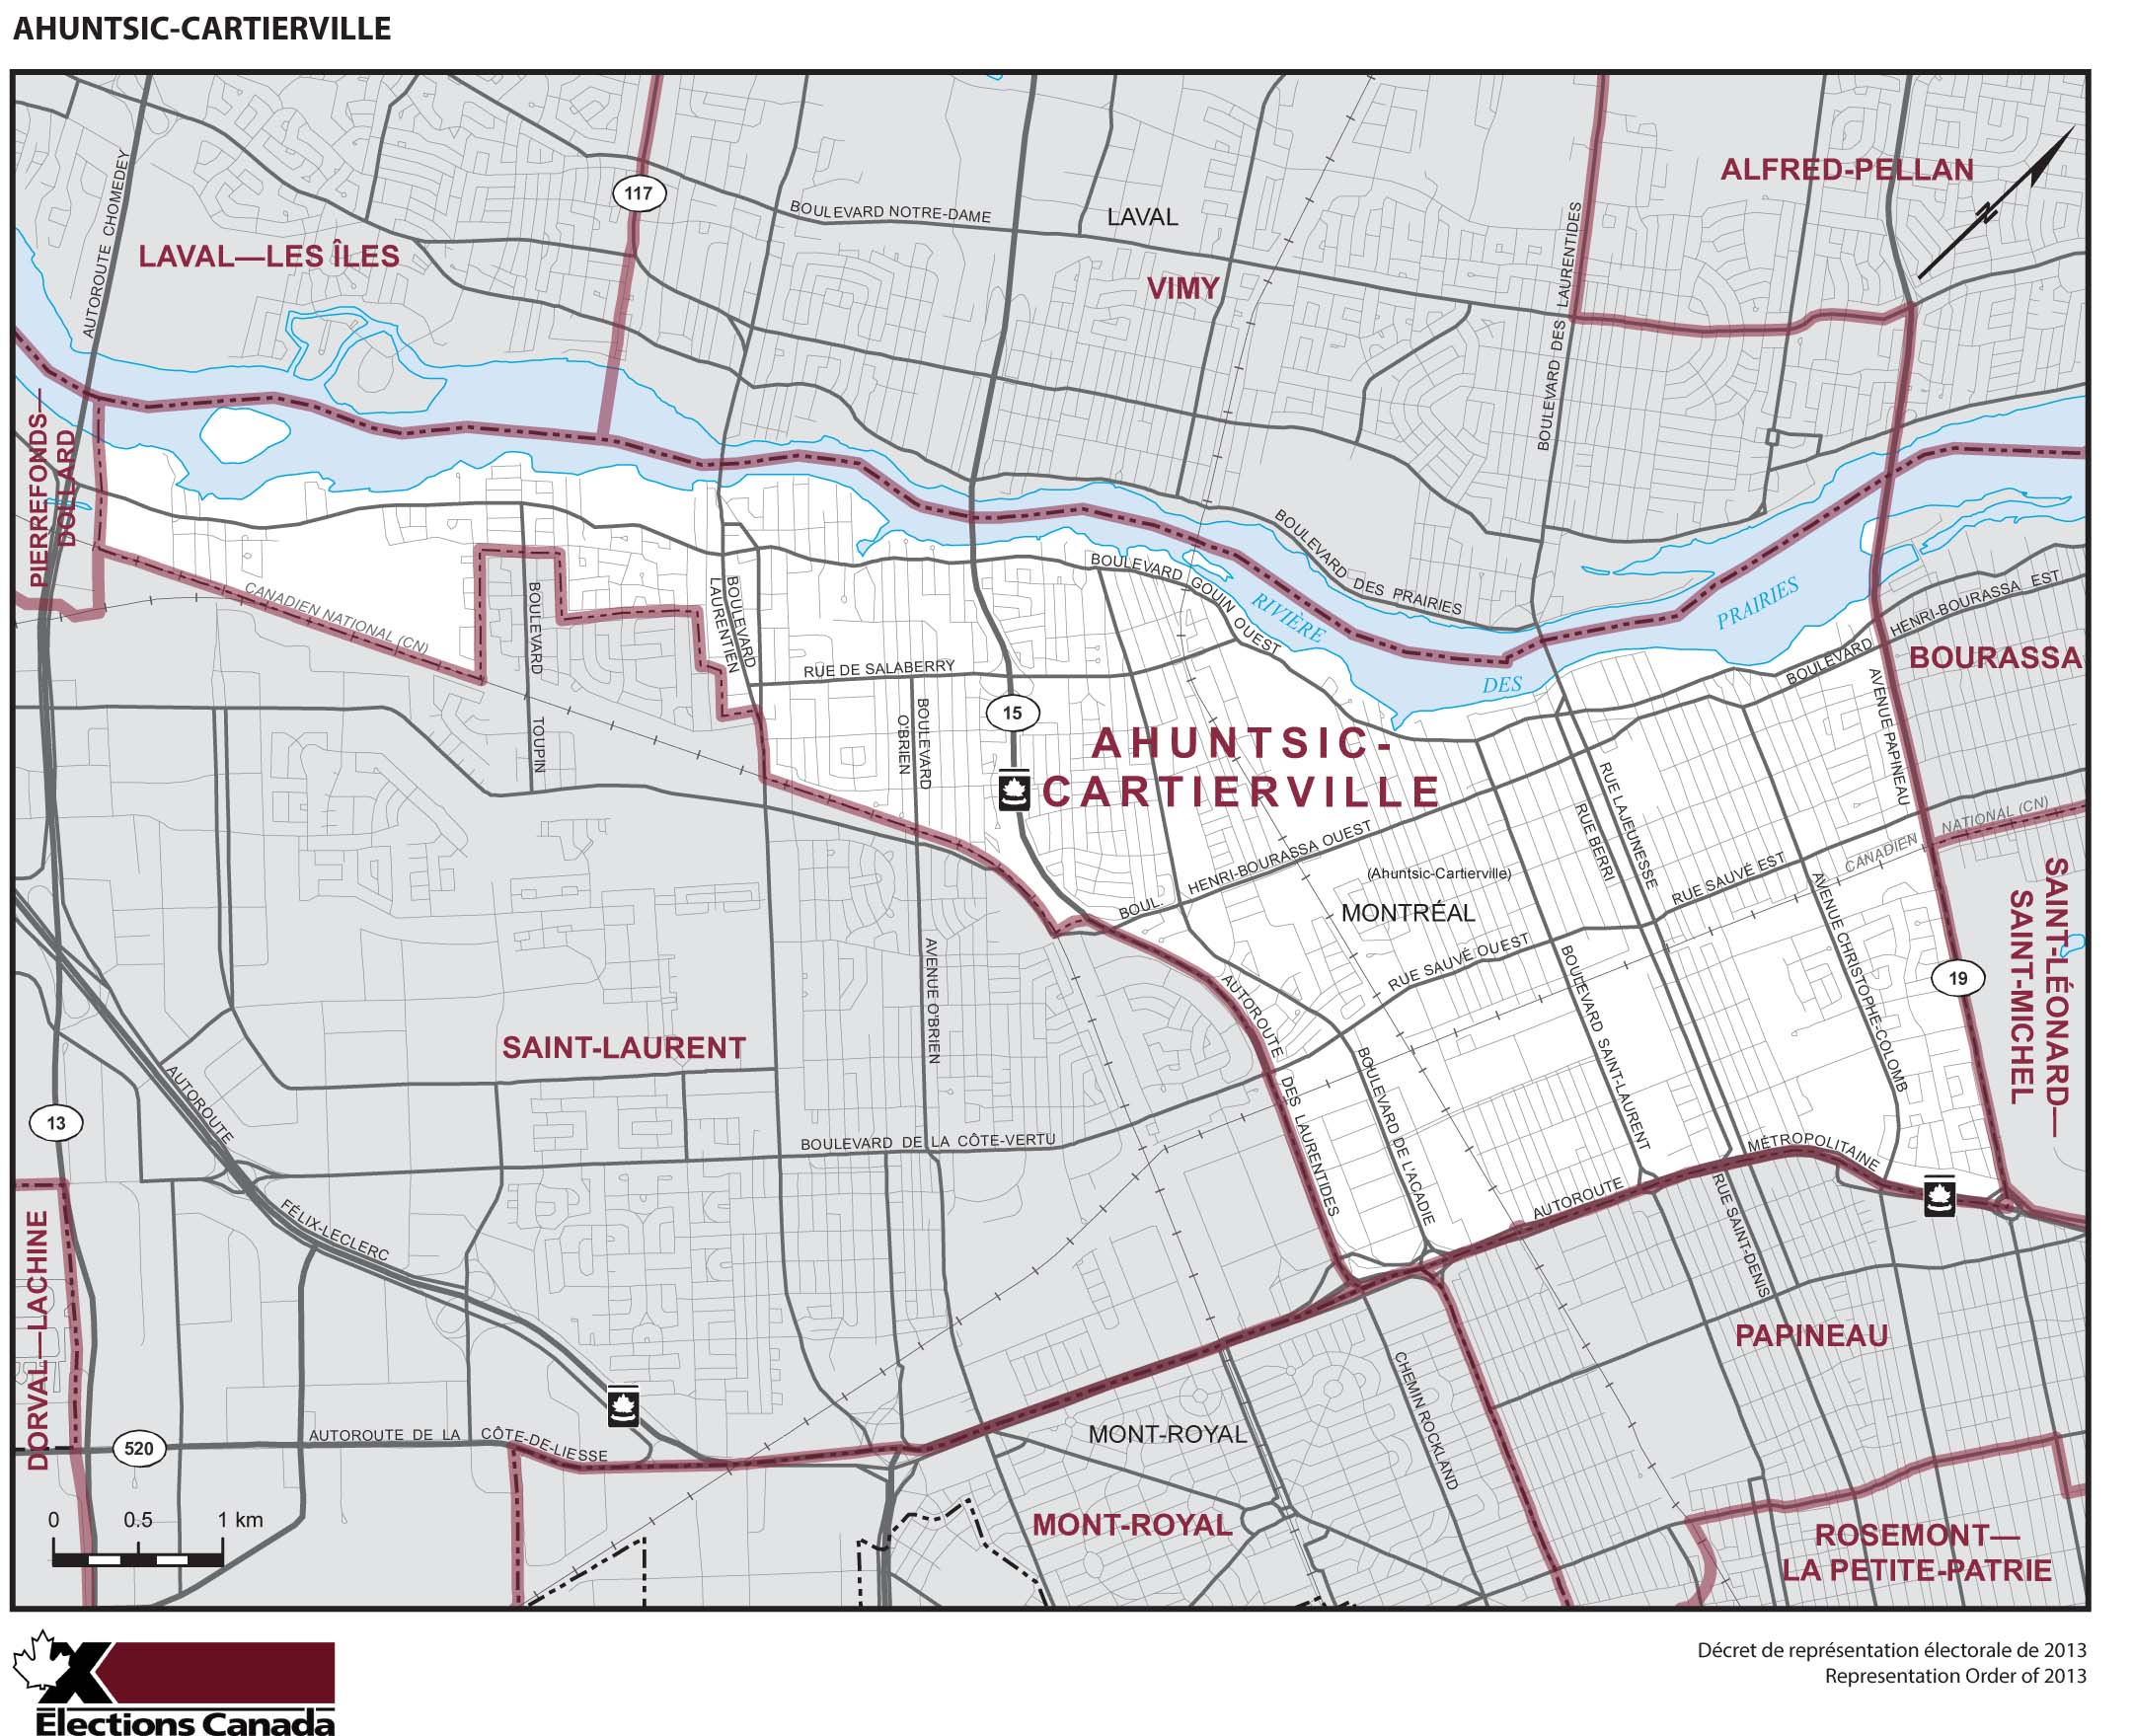 Map: Ahuntsic-Cartierville, Federal electoral district, 2013 Representation Order (in white), Quebec